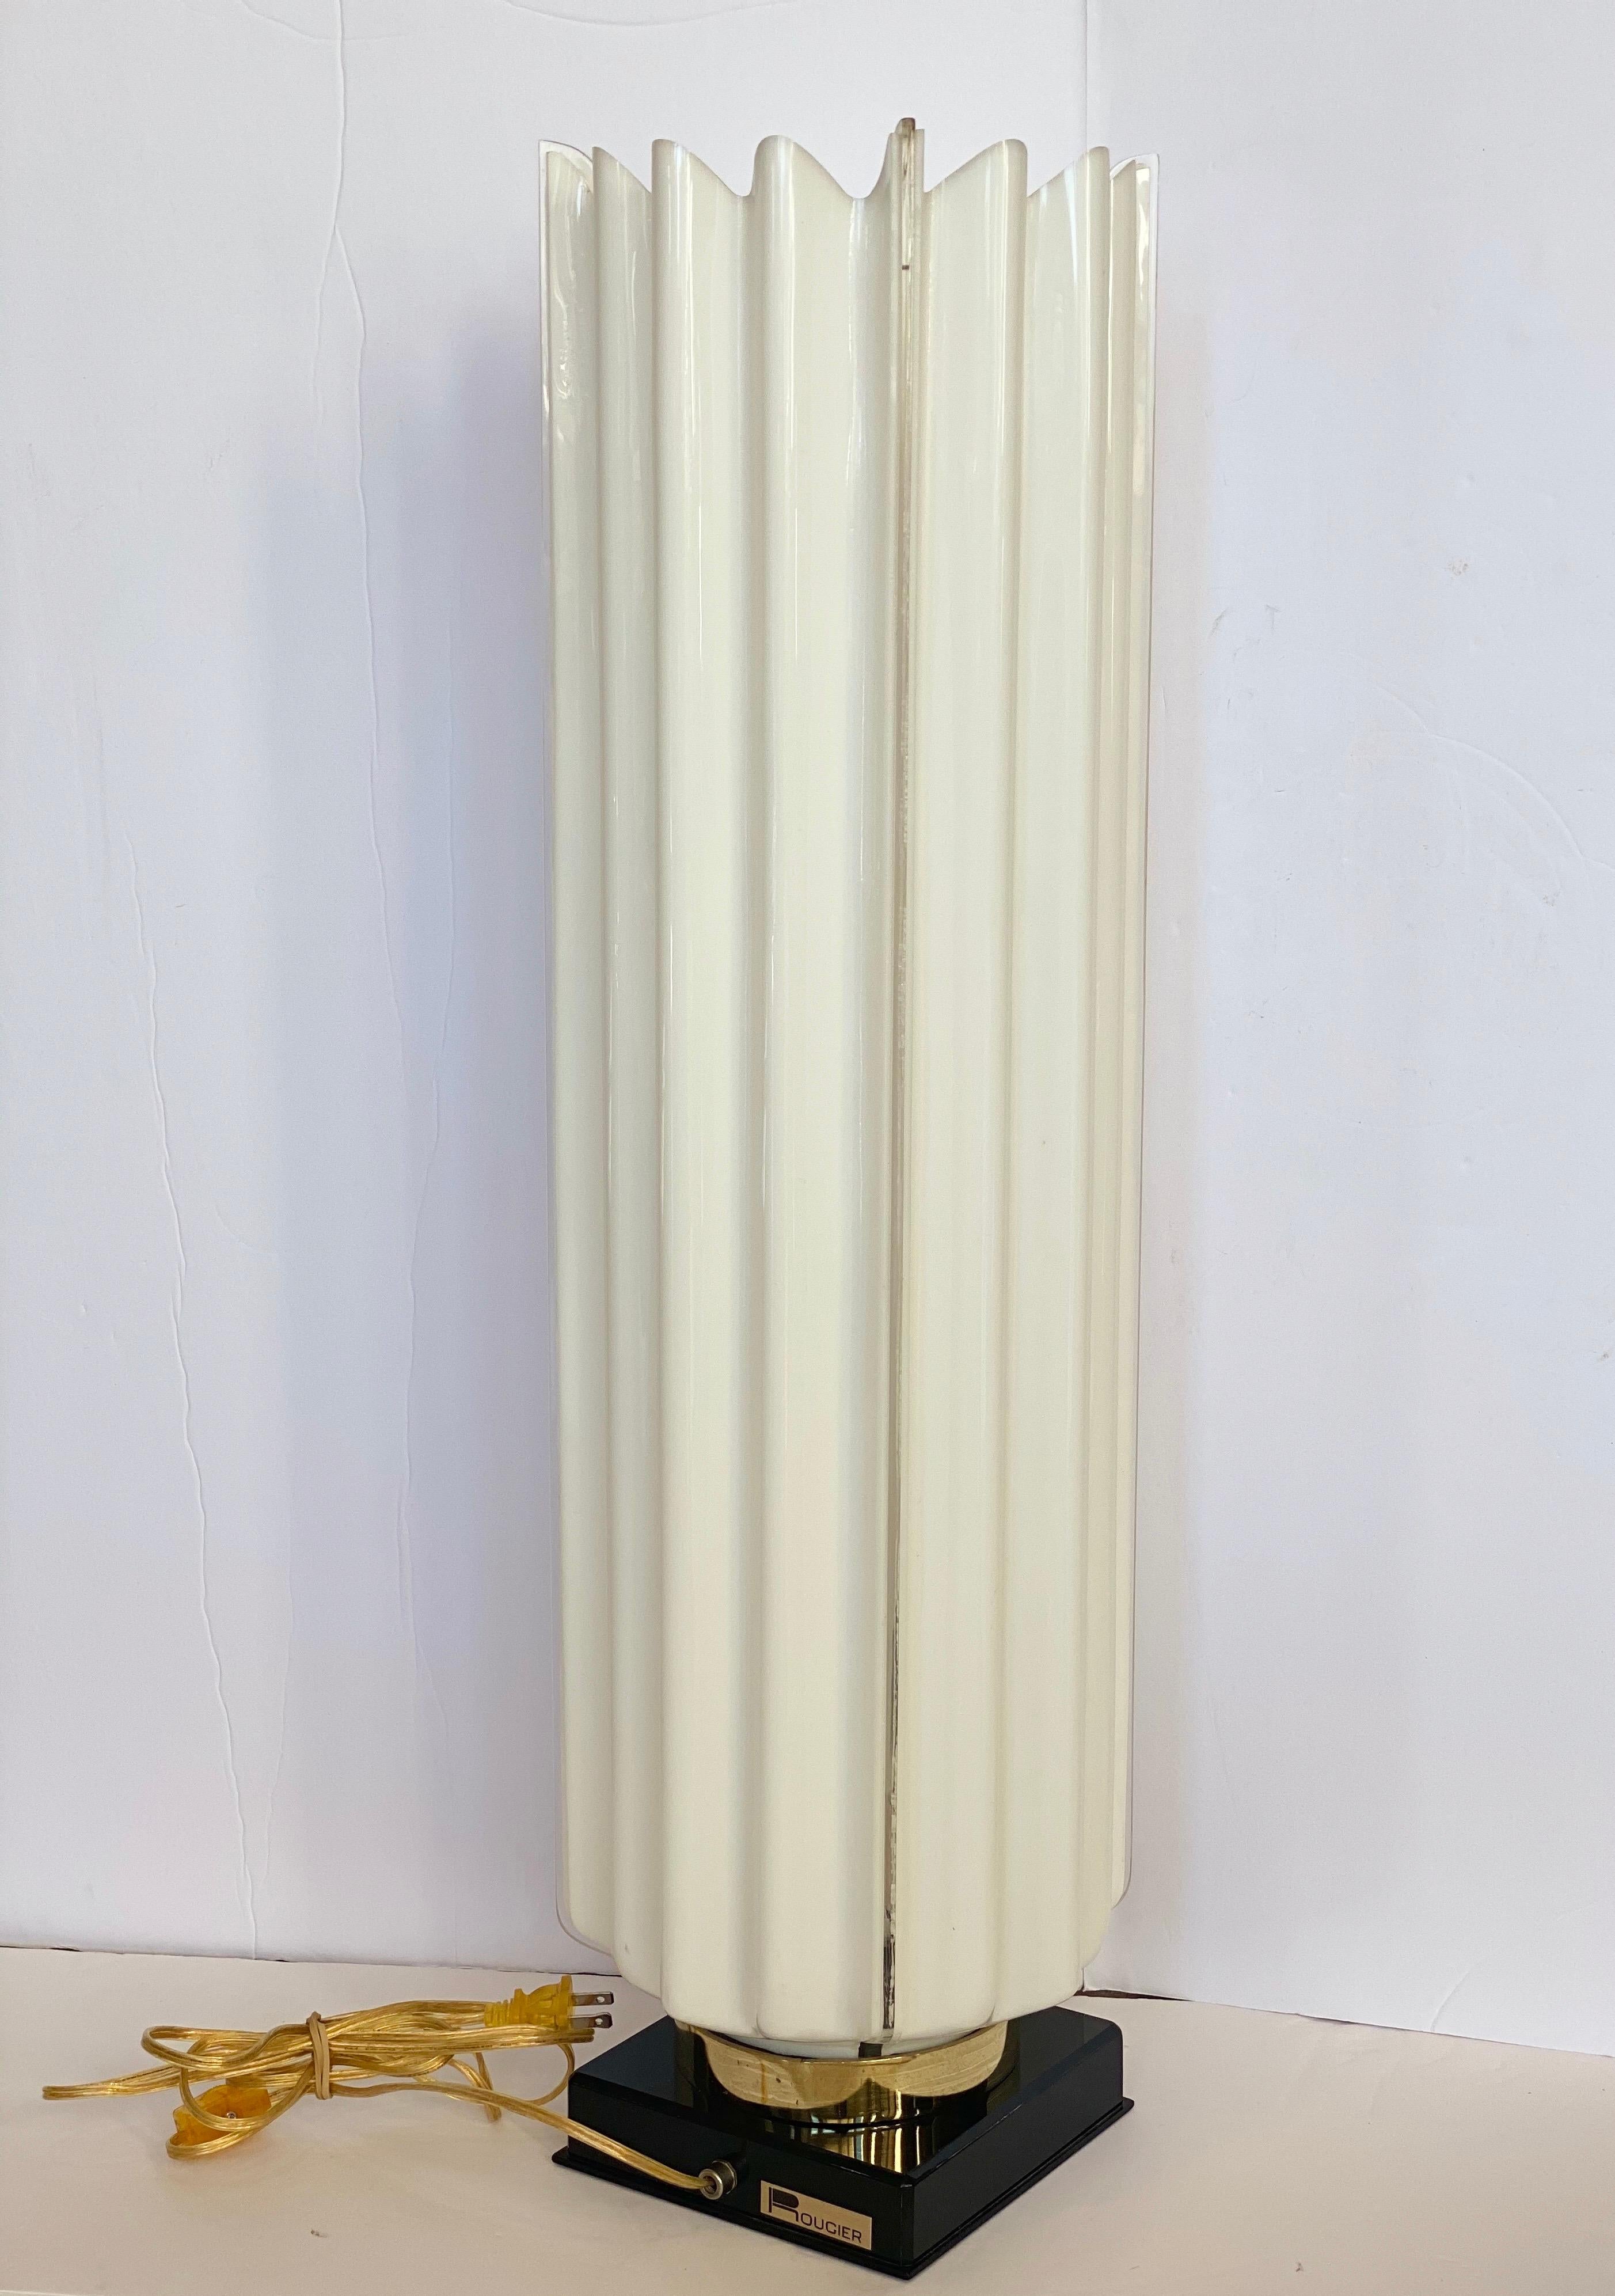 We are very pleased to offer a sculptural, modern table lamp by Rougier, circa the 1970s. A fluted white column sits on a square black acrylic base, a contrast in both shape and color that is sure to add visual interest to any space. In mint